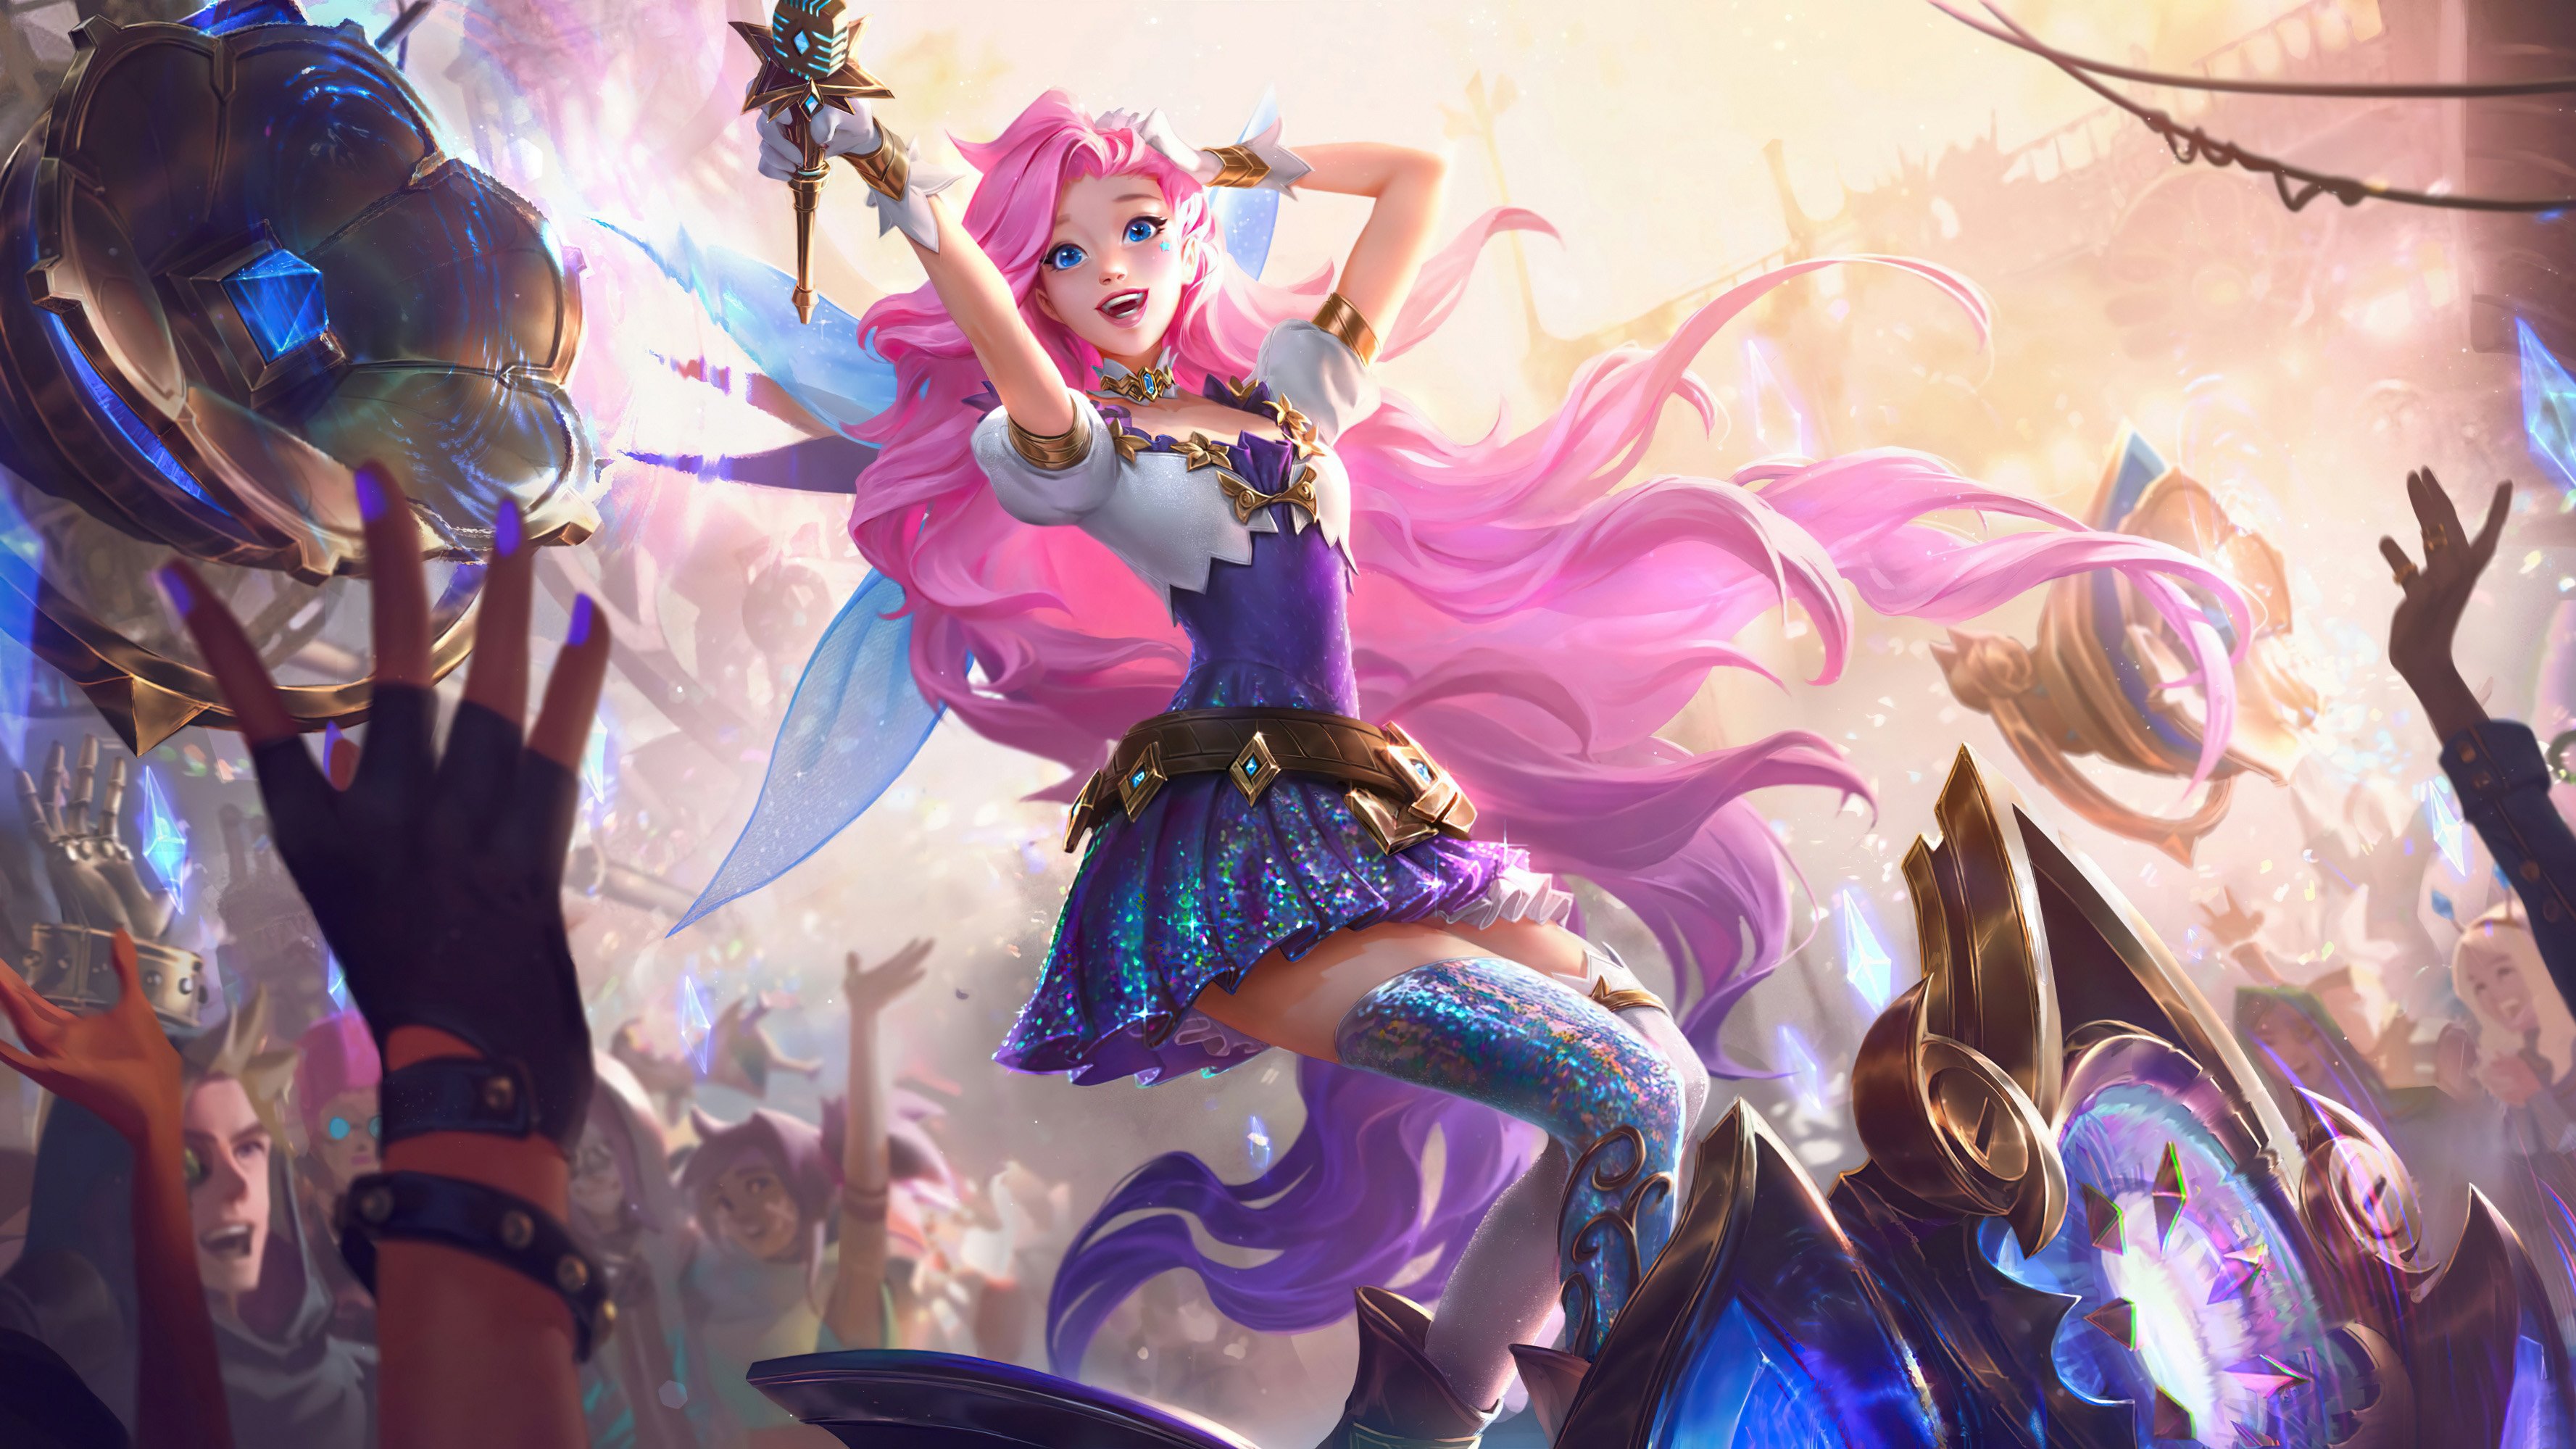 Wallpaper Seraphine from League of Legends